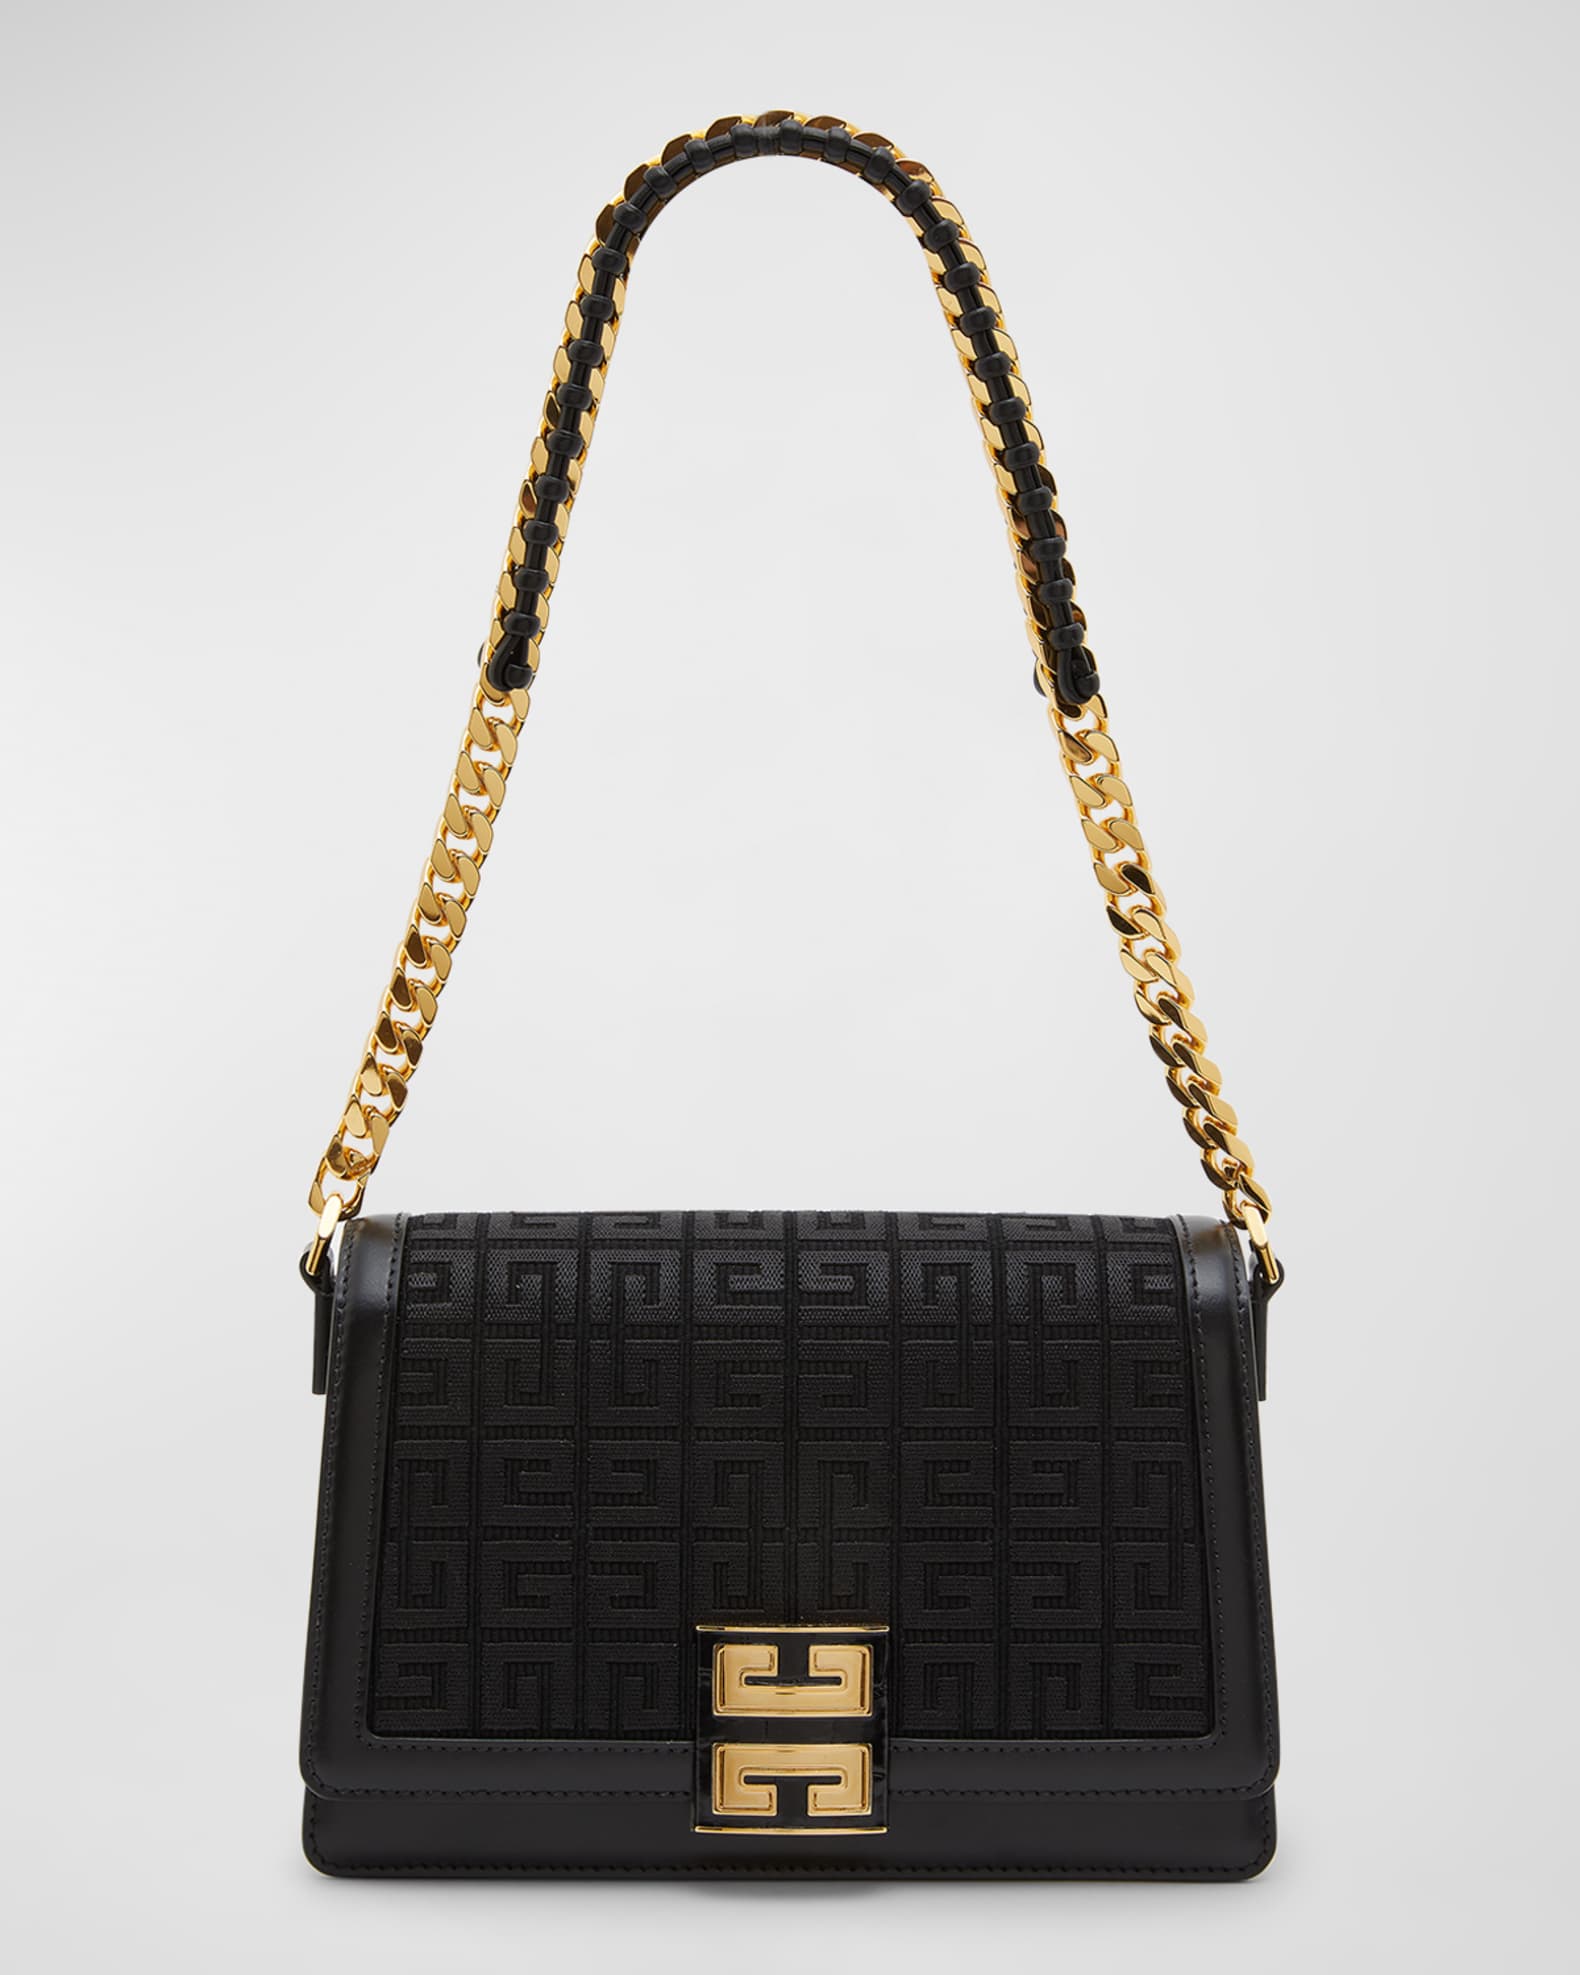 Givenchy 4G Medium Crossbody in 4G Embroidery with Woven Chain | Neiman ...